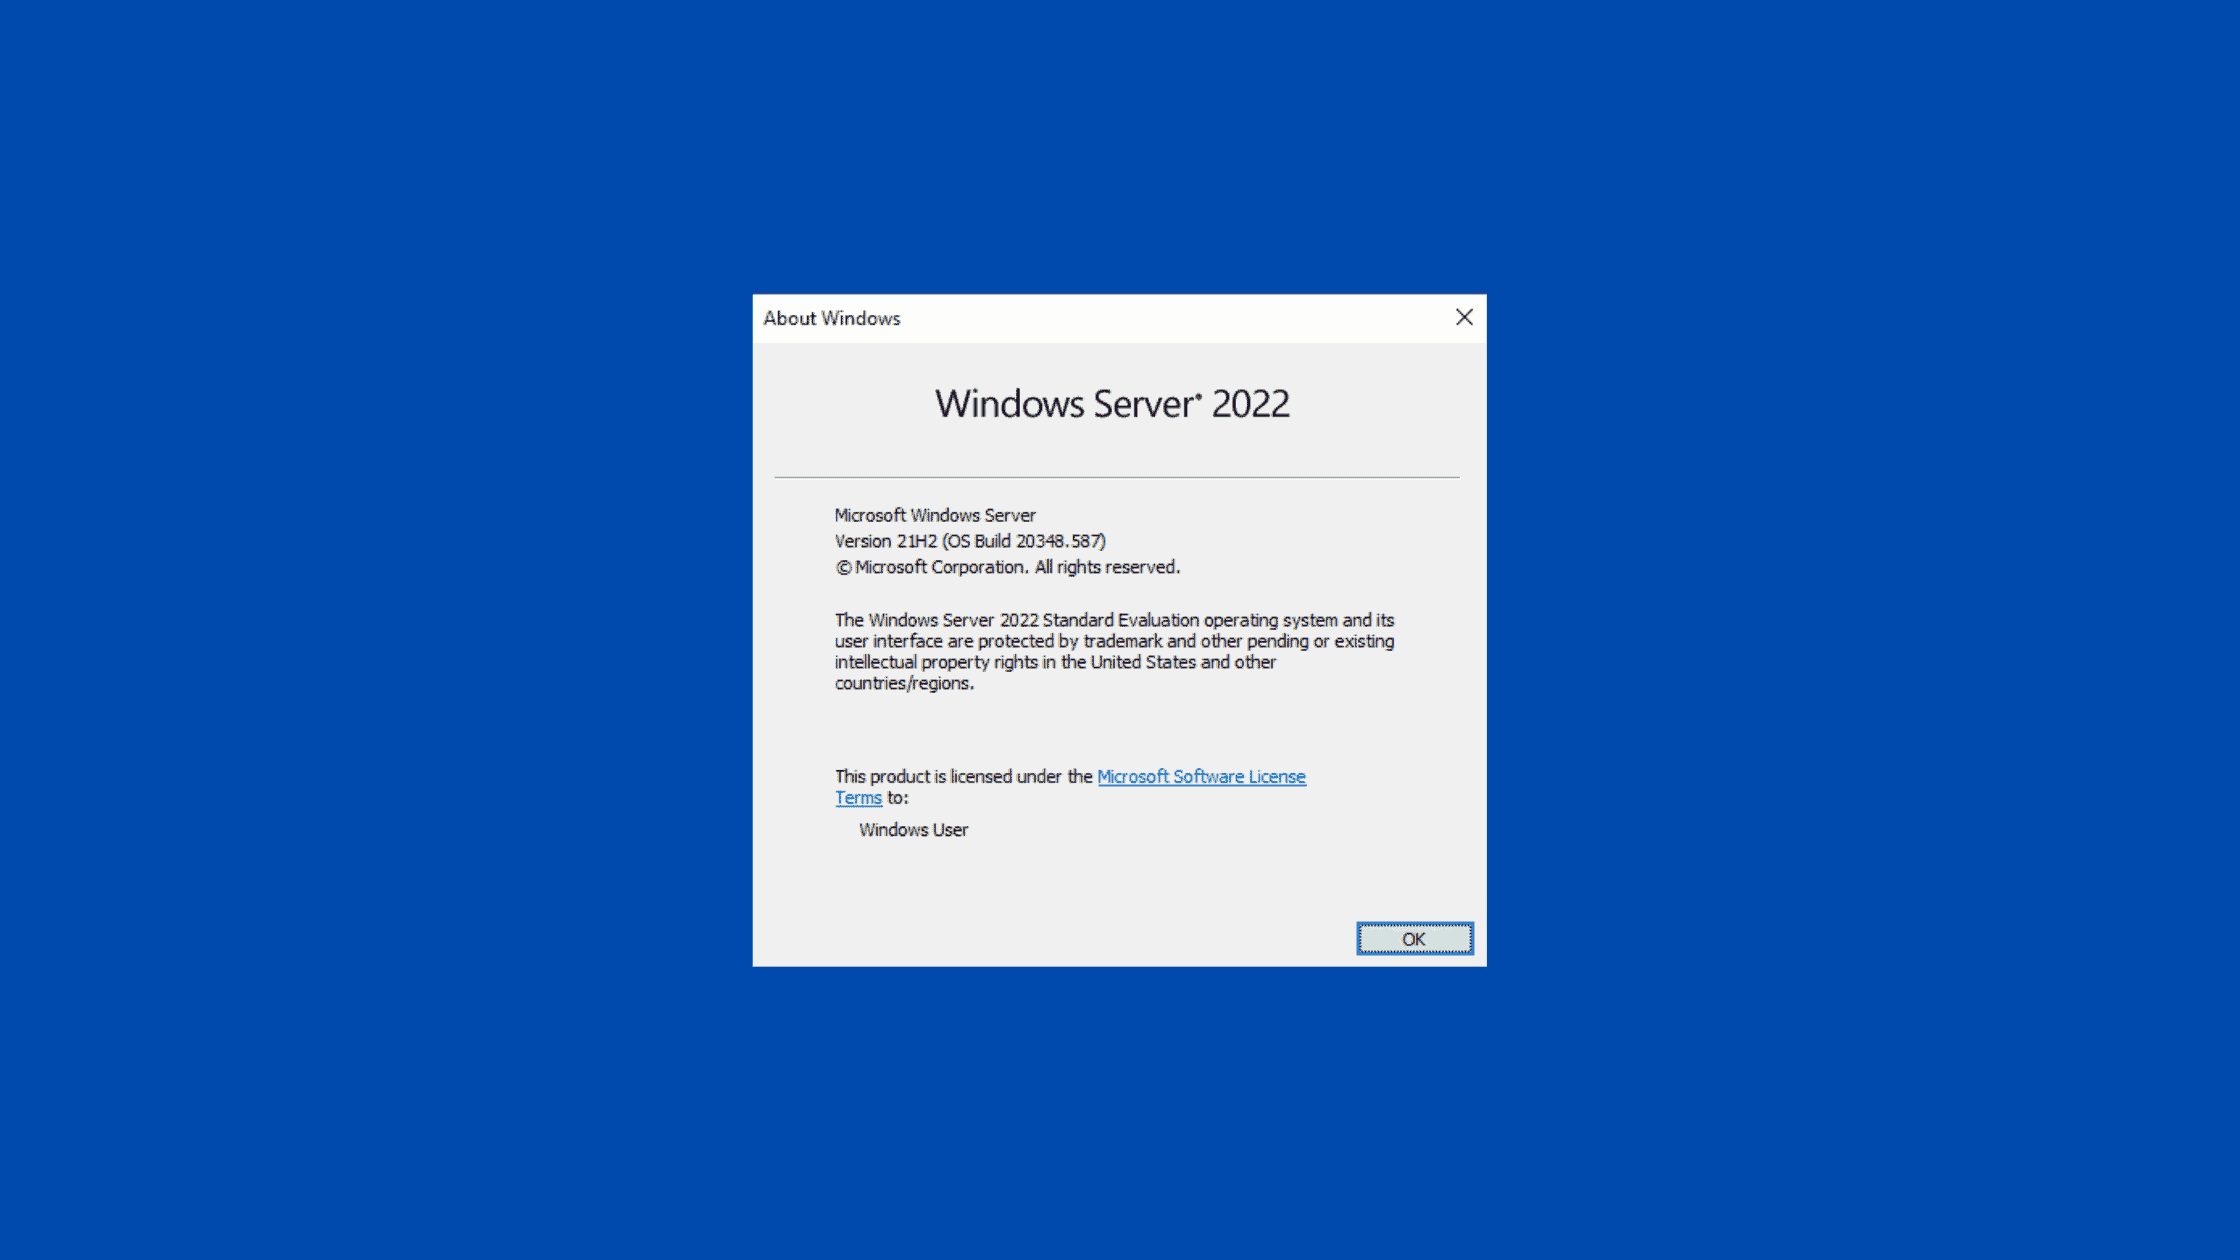 Step By Step Procedure To Install Windows Server 2022 On Vmware Workstation